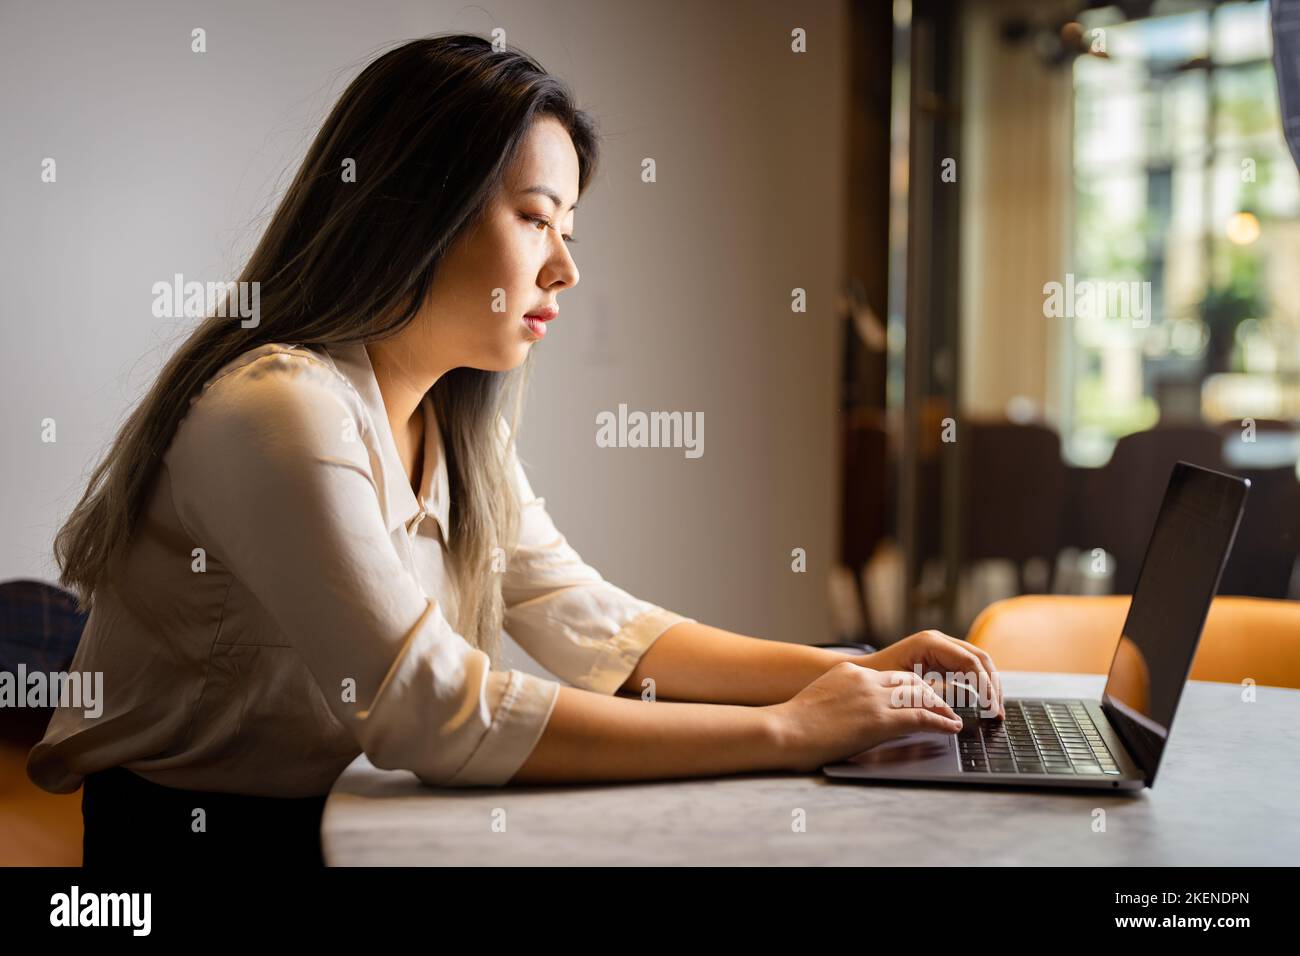 Young Female Data Scientist Working on Her Laptop in a Conference Room Stock Photo